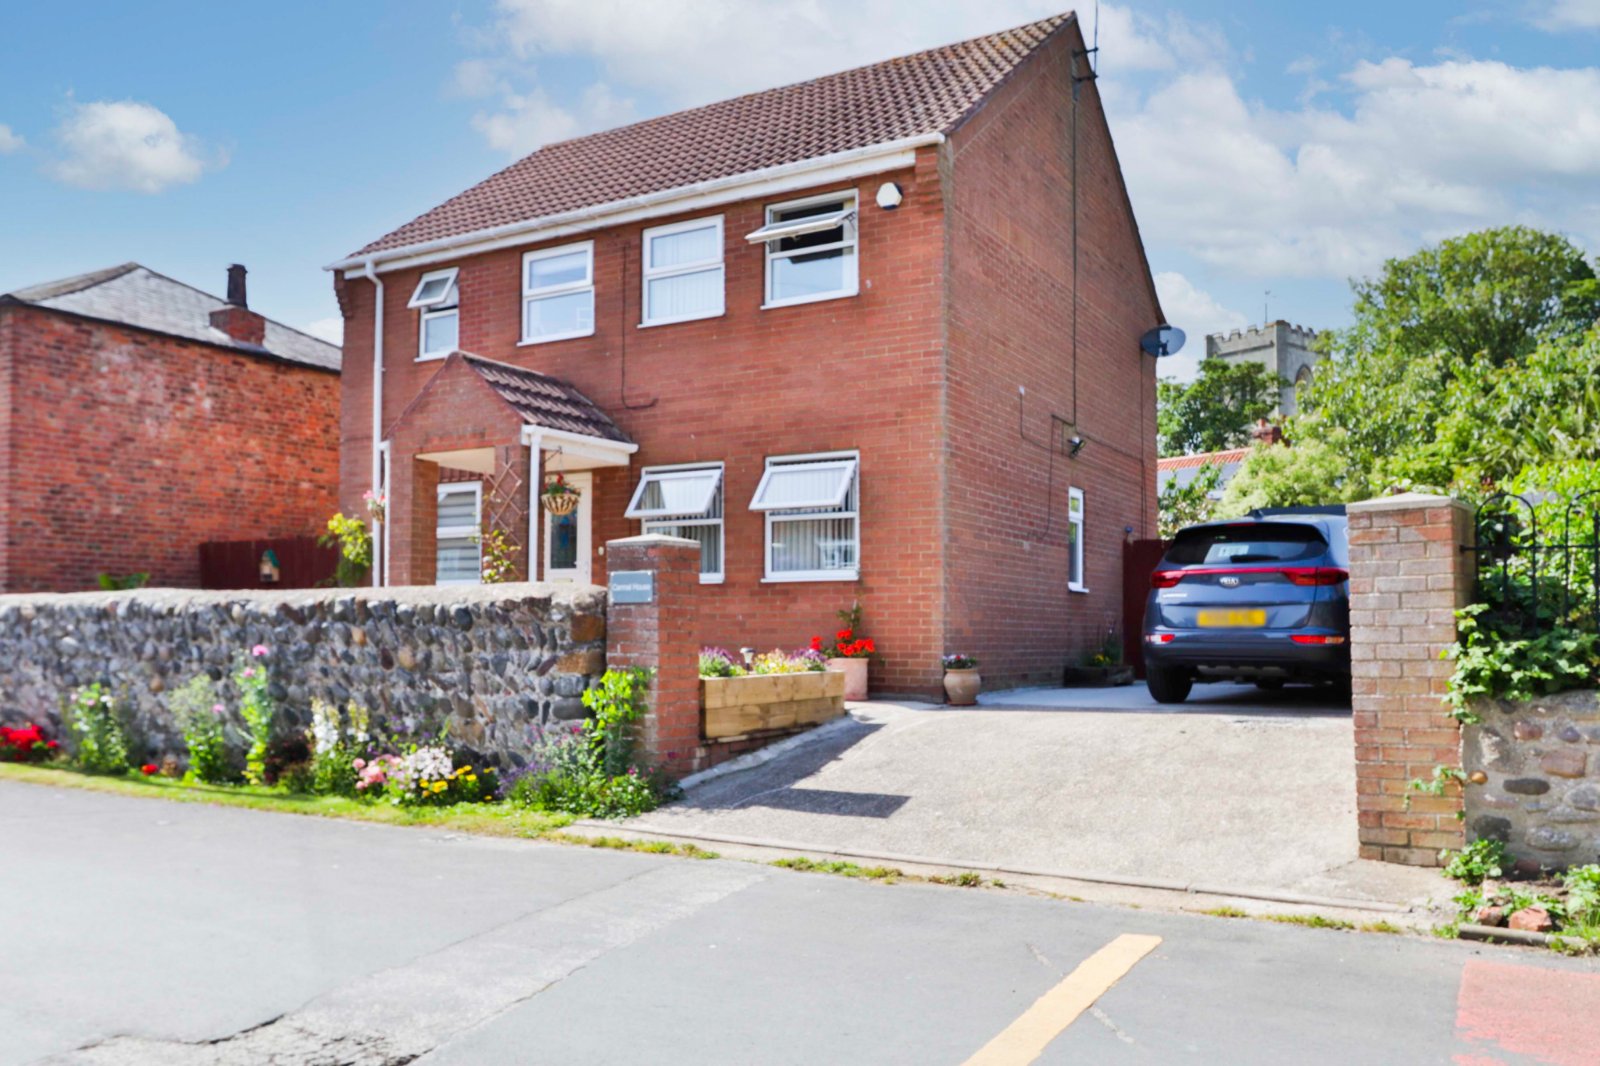 4 bed house for sale in Back Street, Easington - Property Image 1